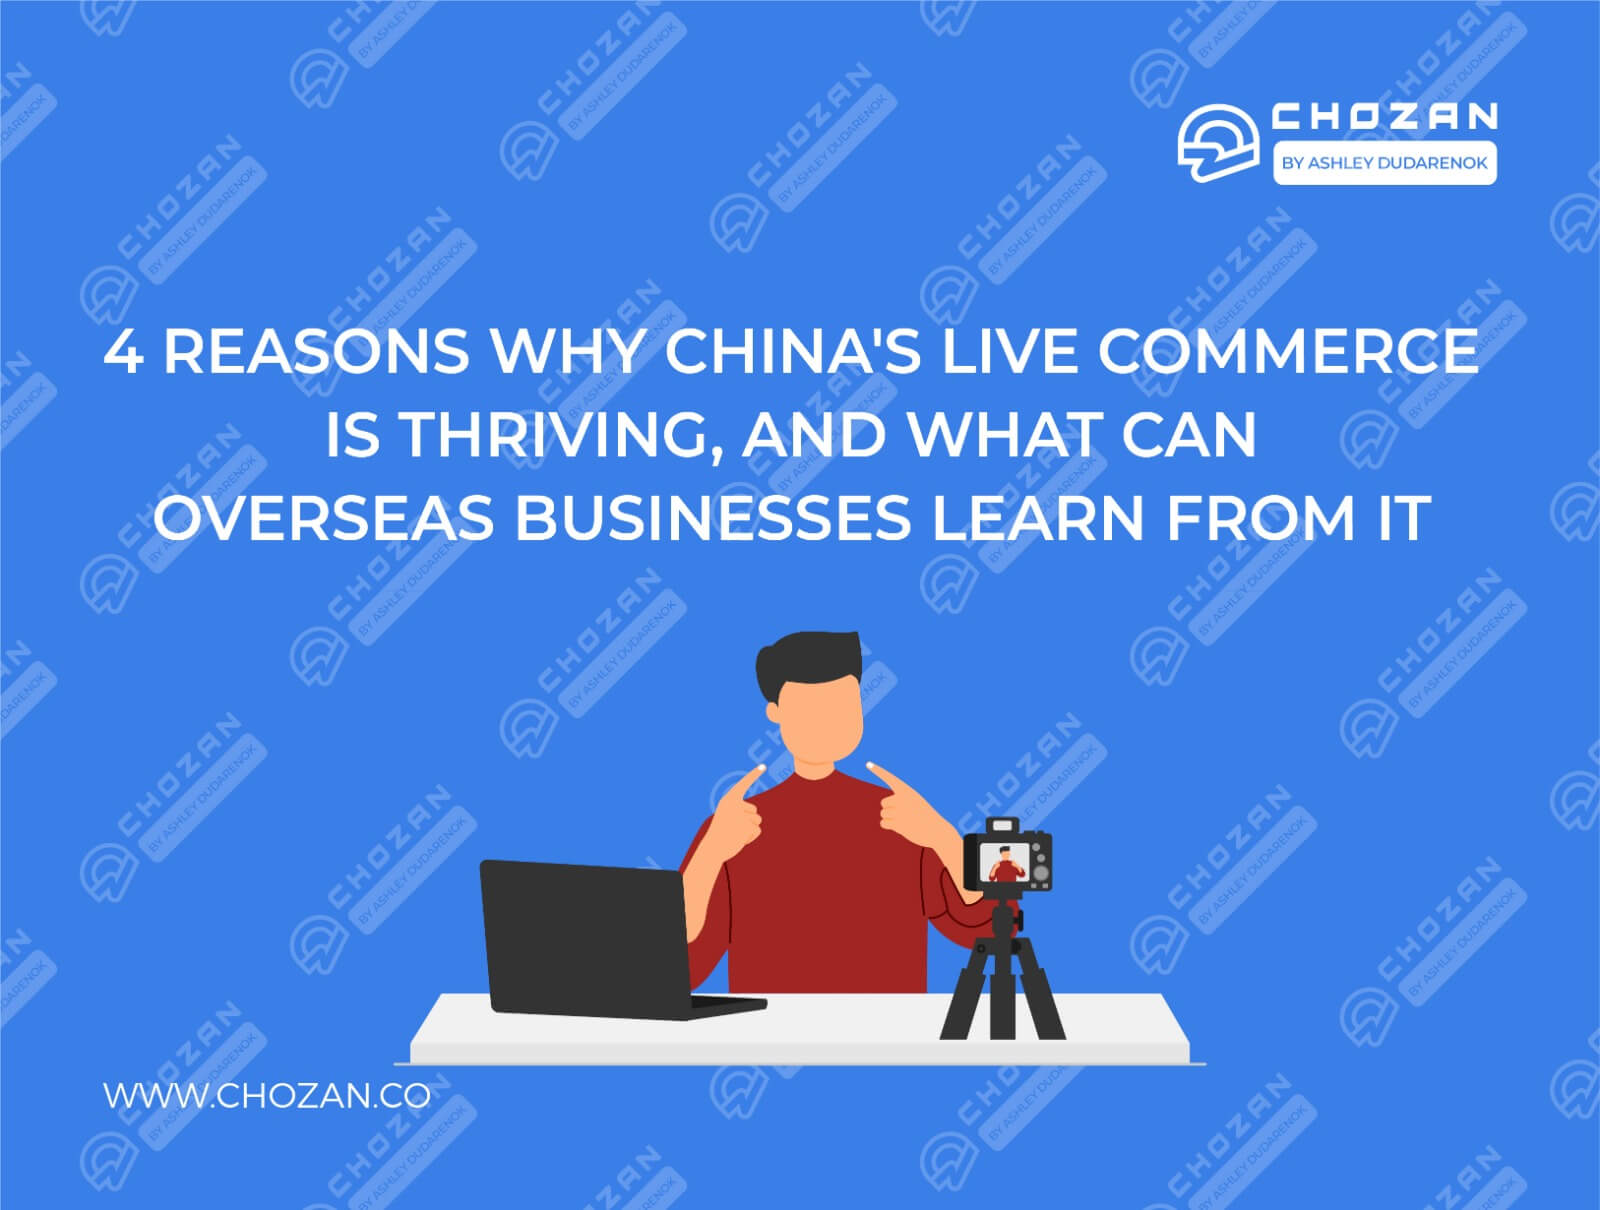 4 Reasons why China’s Live Commerce is thriving, and What Can Overseas Businesses Learn From It